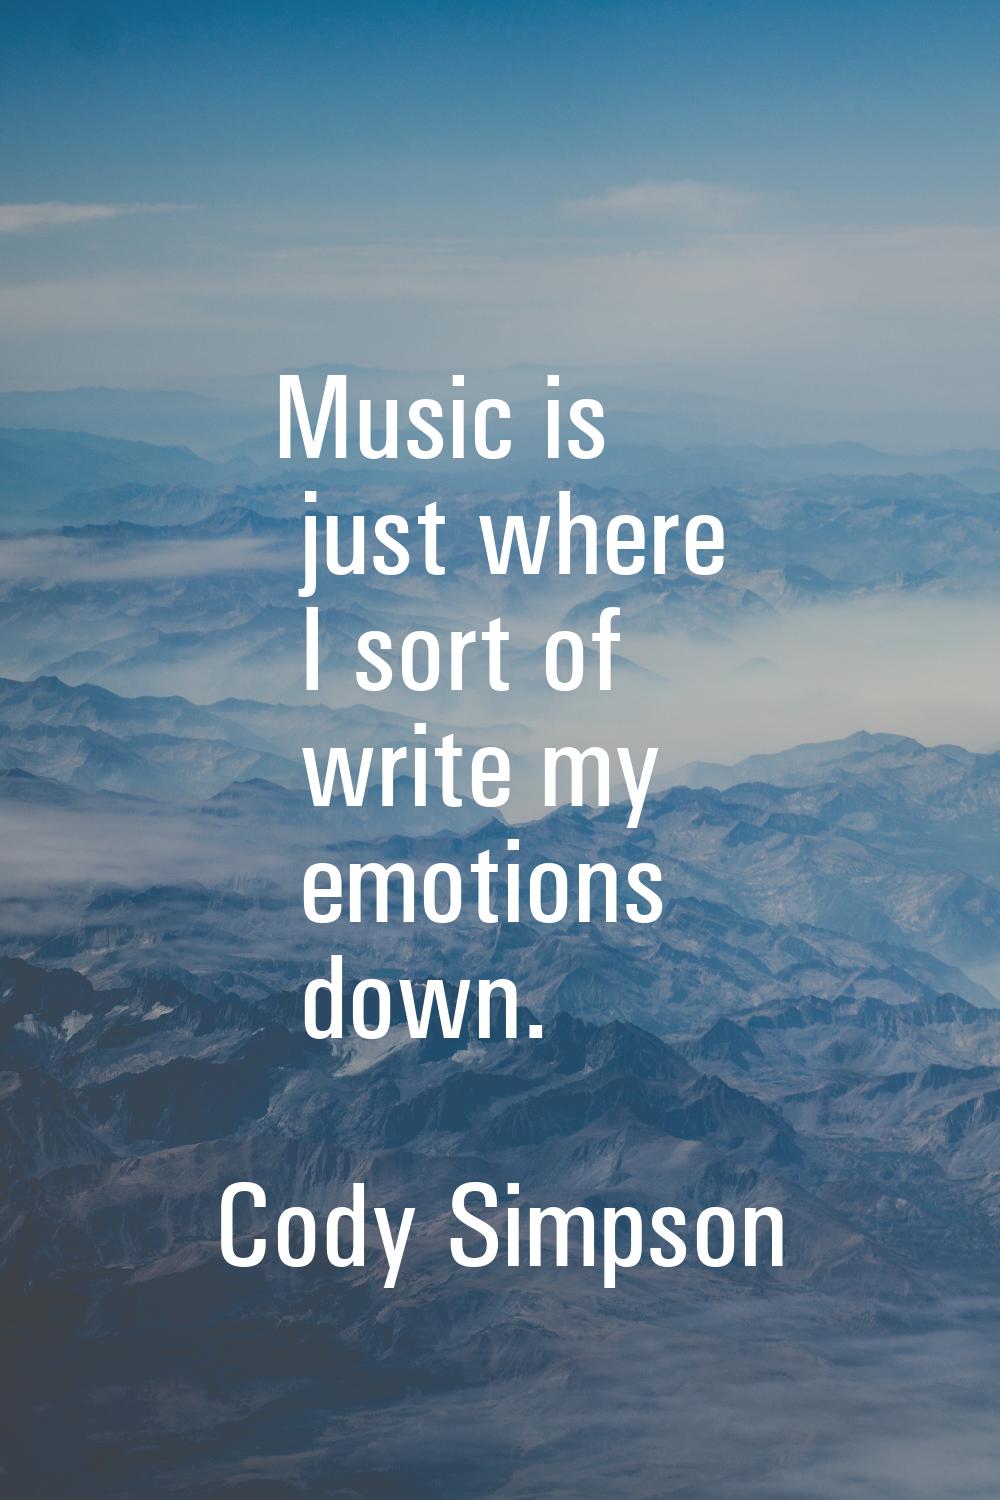 Music is just where I sort of write my emotions down.